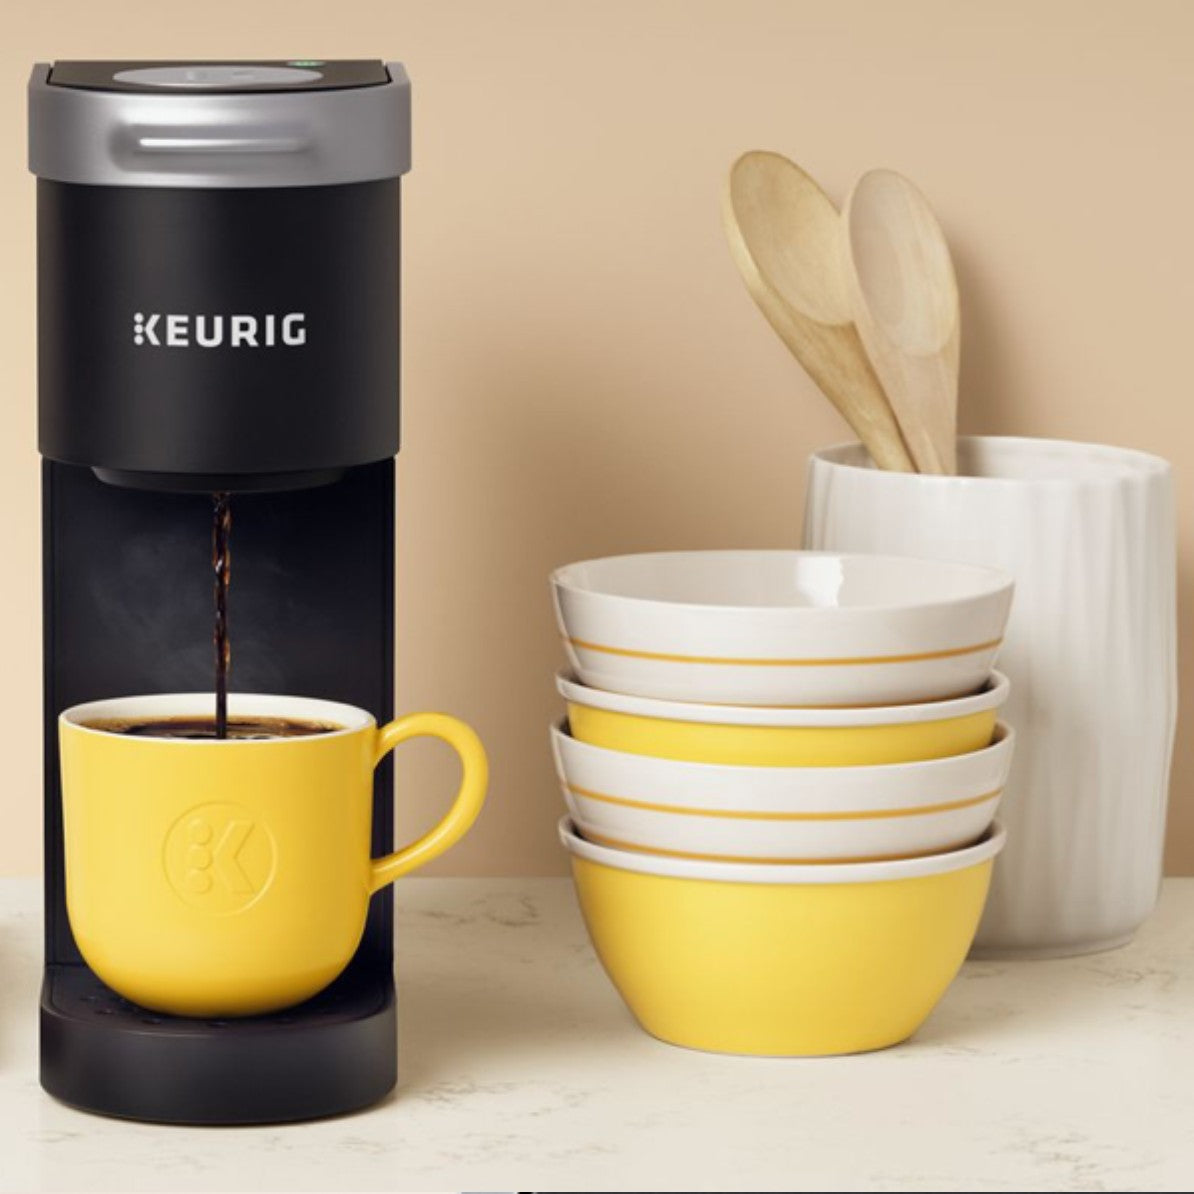 A black colored Keurig K-Mini coffee machine in a kitchen next to bowls and wooden spoons.